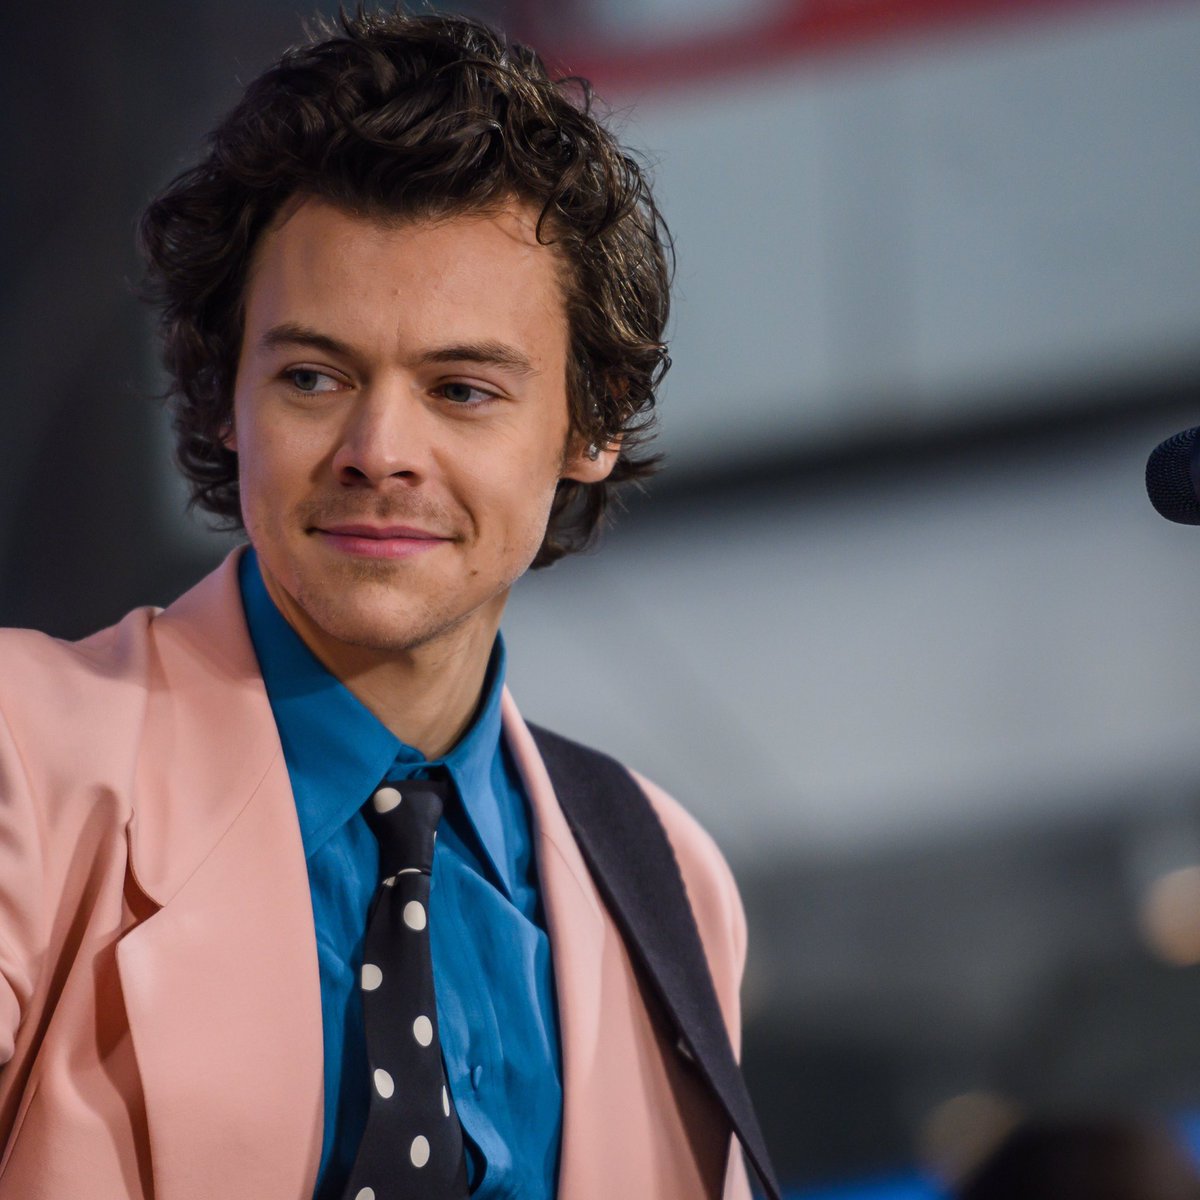 Harry Styles: Harry was sexualised by the public at the age of 16. He was sexually touched by an older man. It was also being spiculated that he was forced to hide his sexuality.